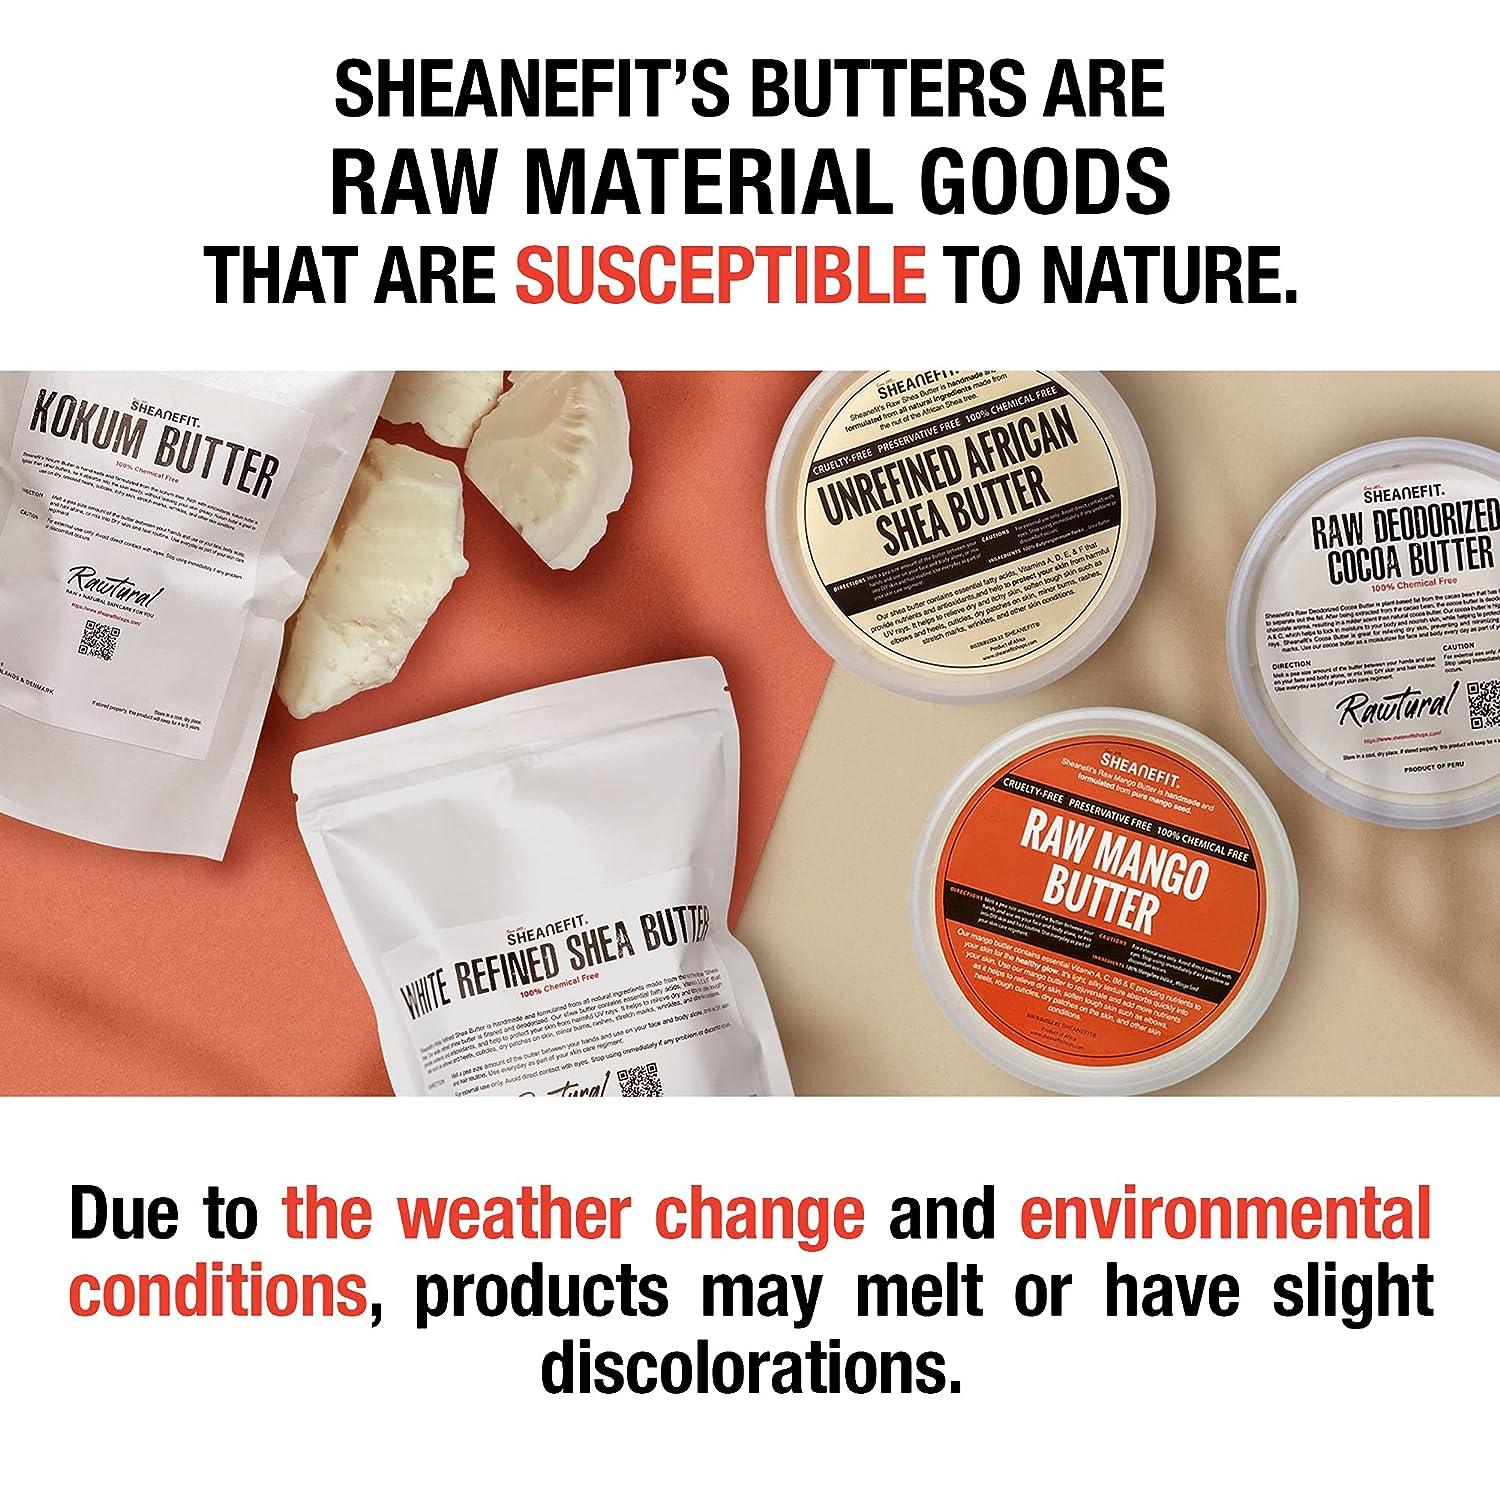 Unrefined Shea Butter Bulk Sizes - Butters and Blacksoap